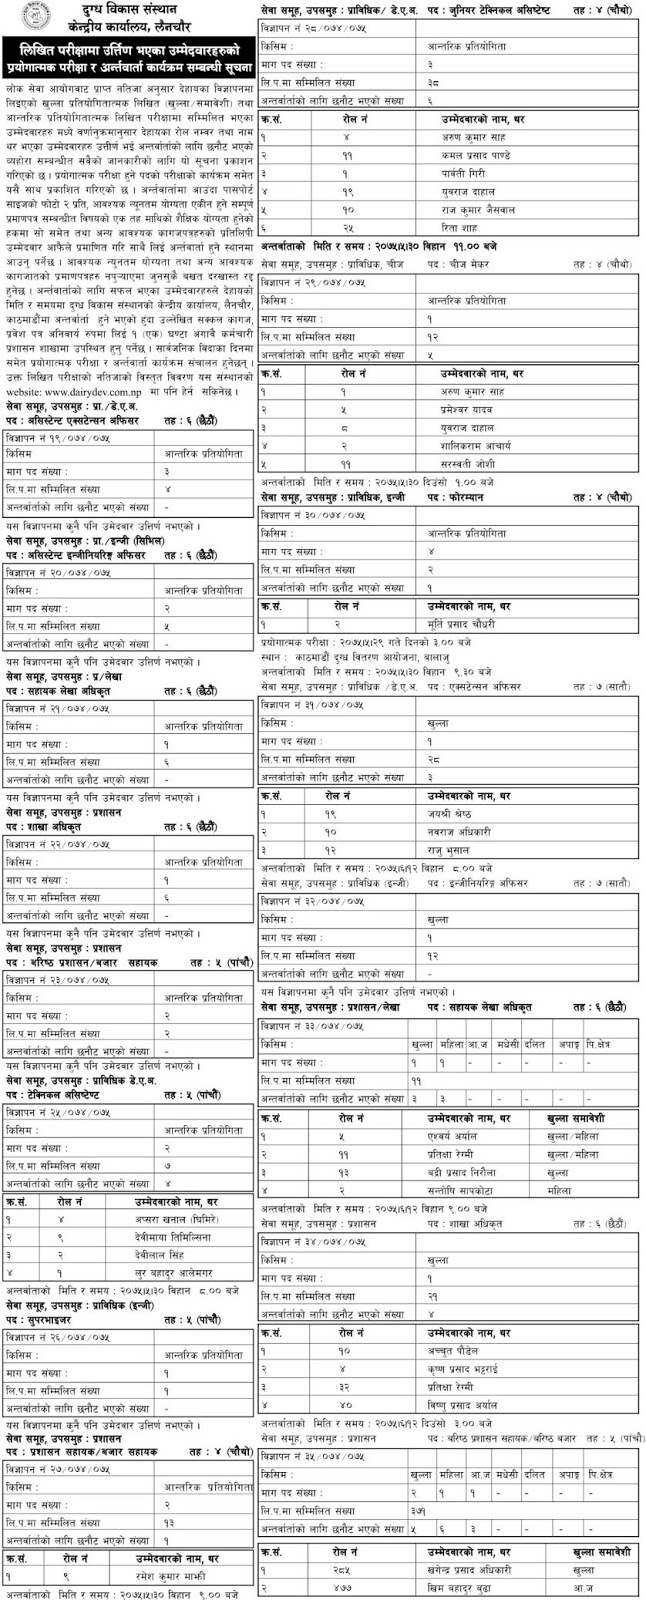 DDC Written Exam Result and Interview Routine